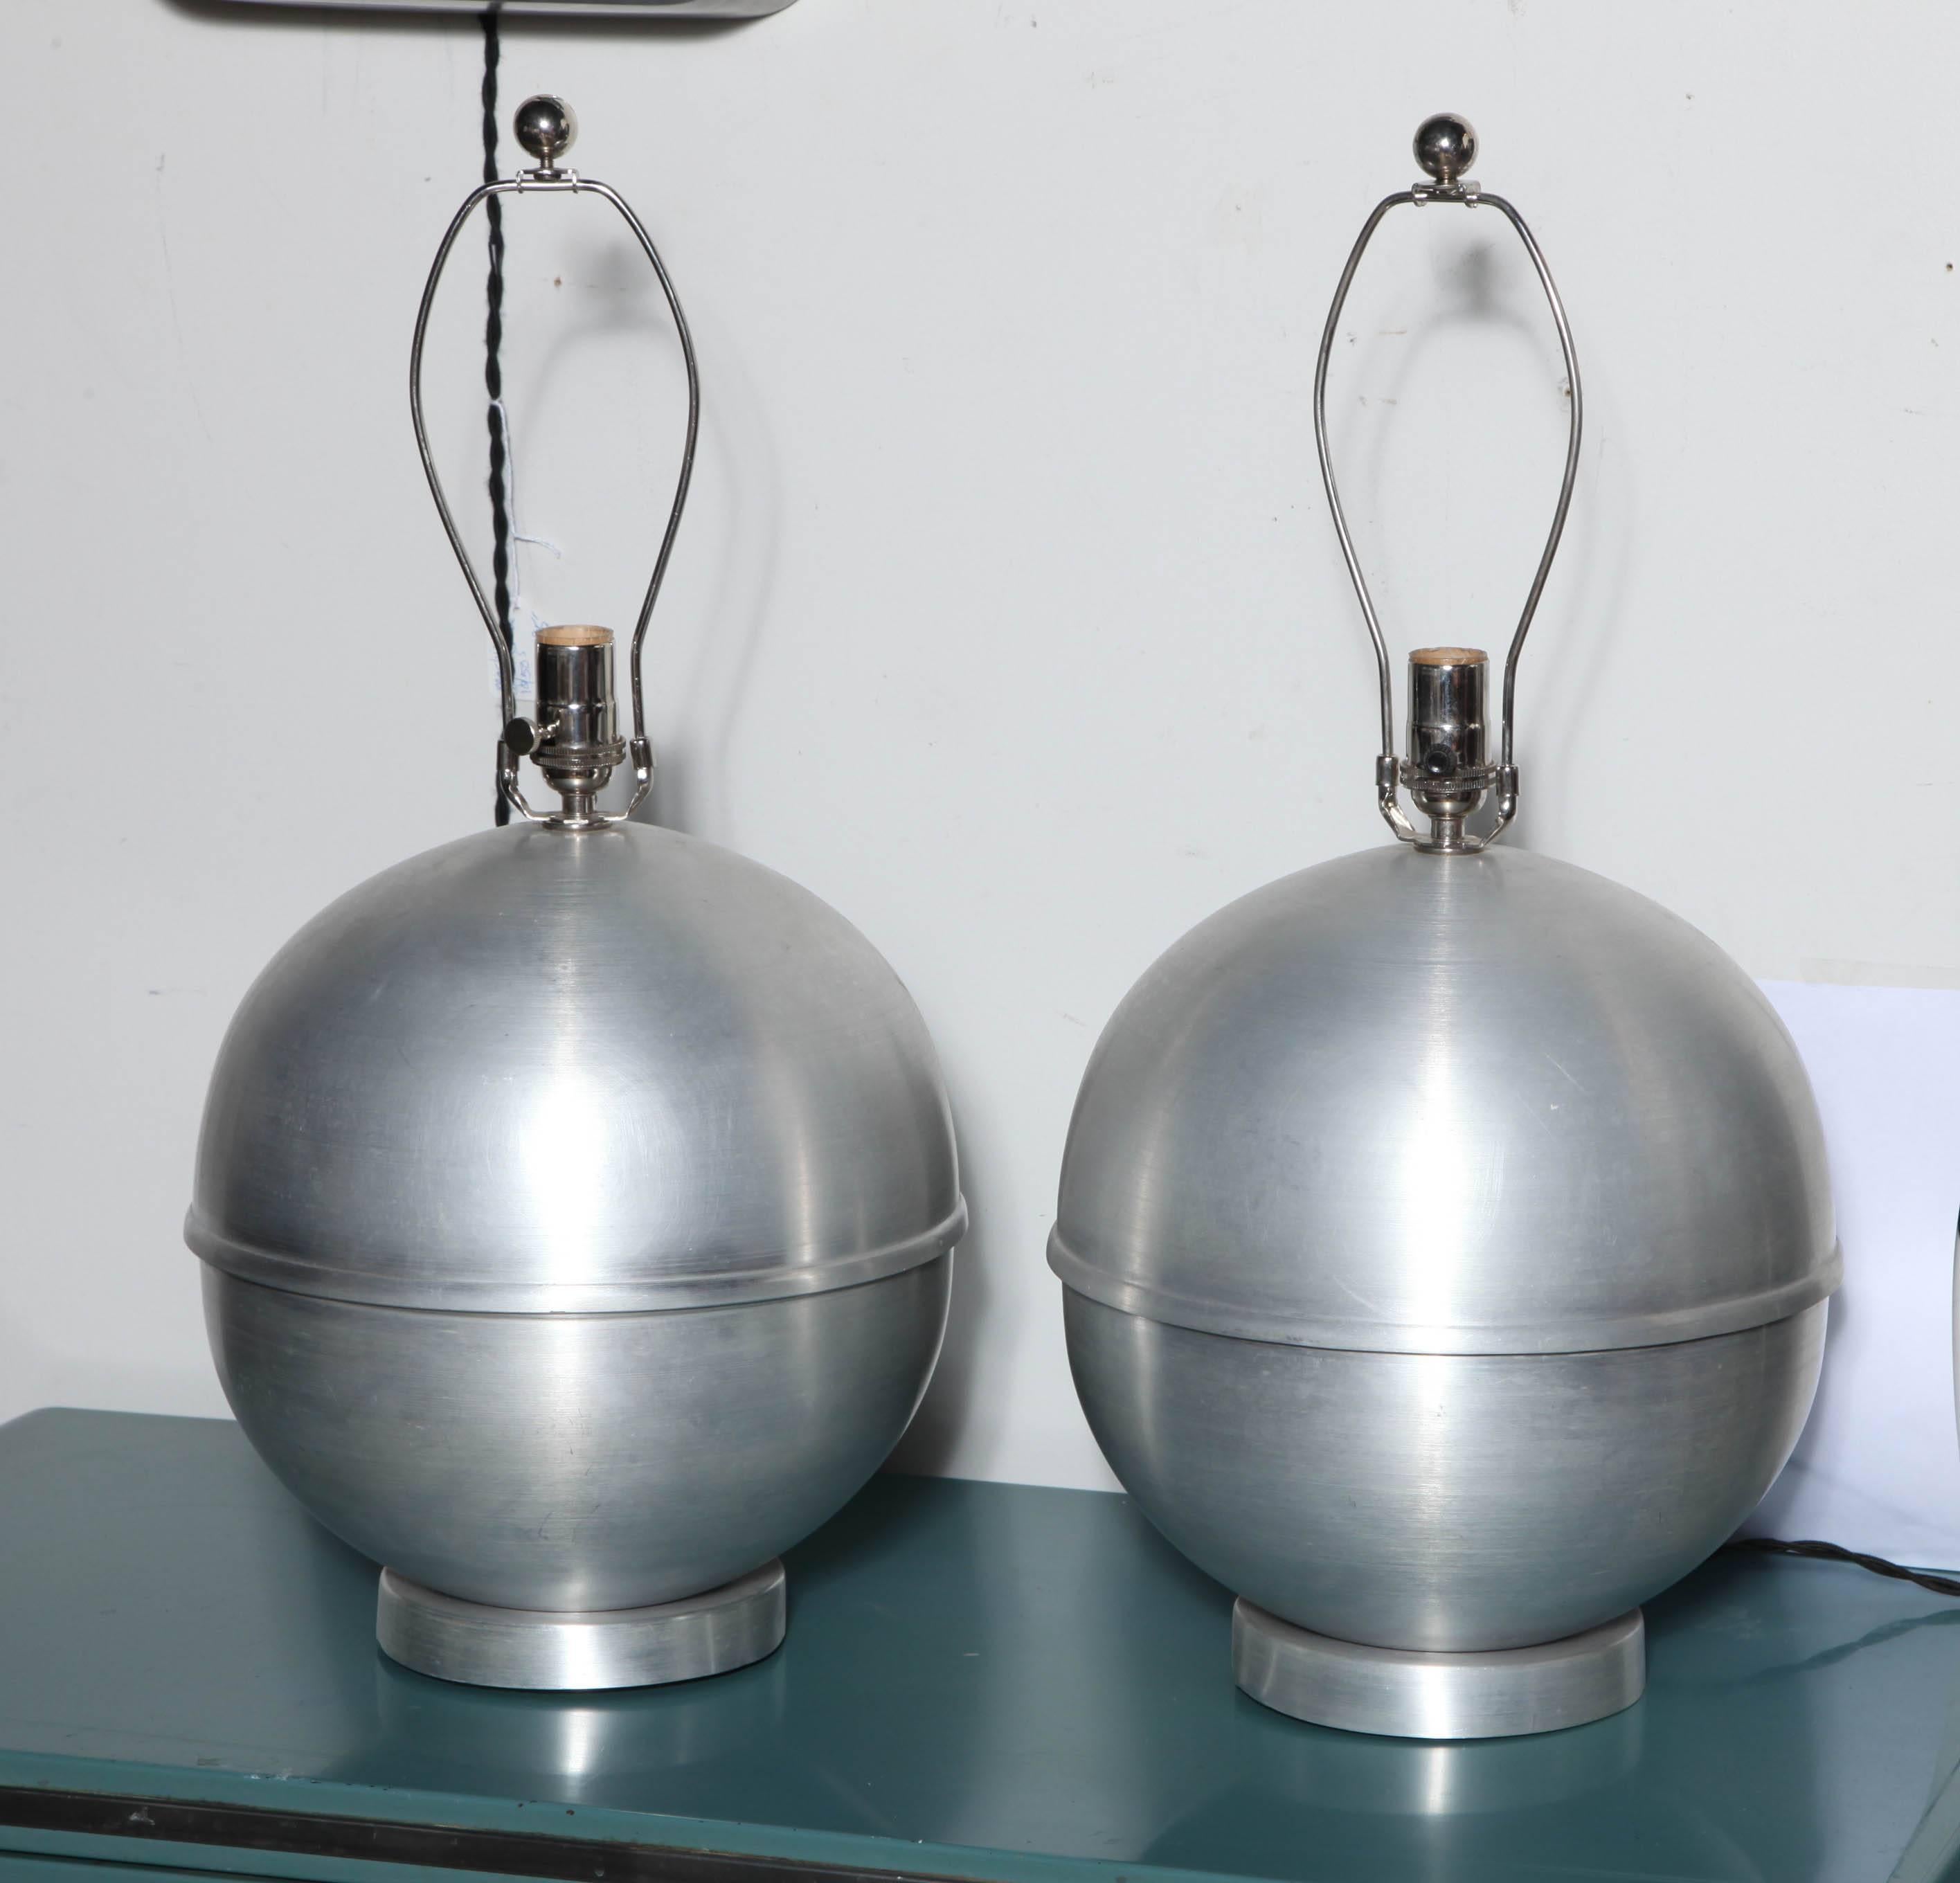 Modernist pair of Russel Wright Style All Spun Aluminum Table Lamps. Featuring a Globe form with center banded detail on round 6D Spun Aluminum base. Lampshades shown for display only. Lightly restored. Rewired with new Nickel plated hardware and